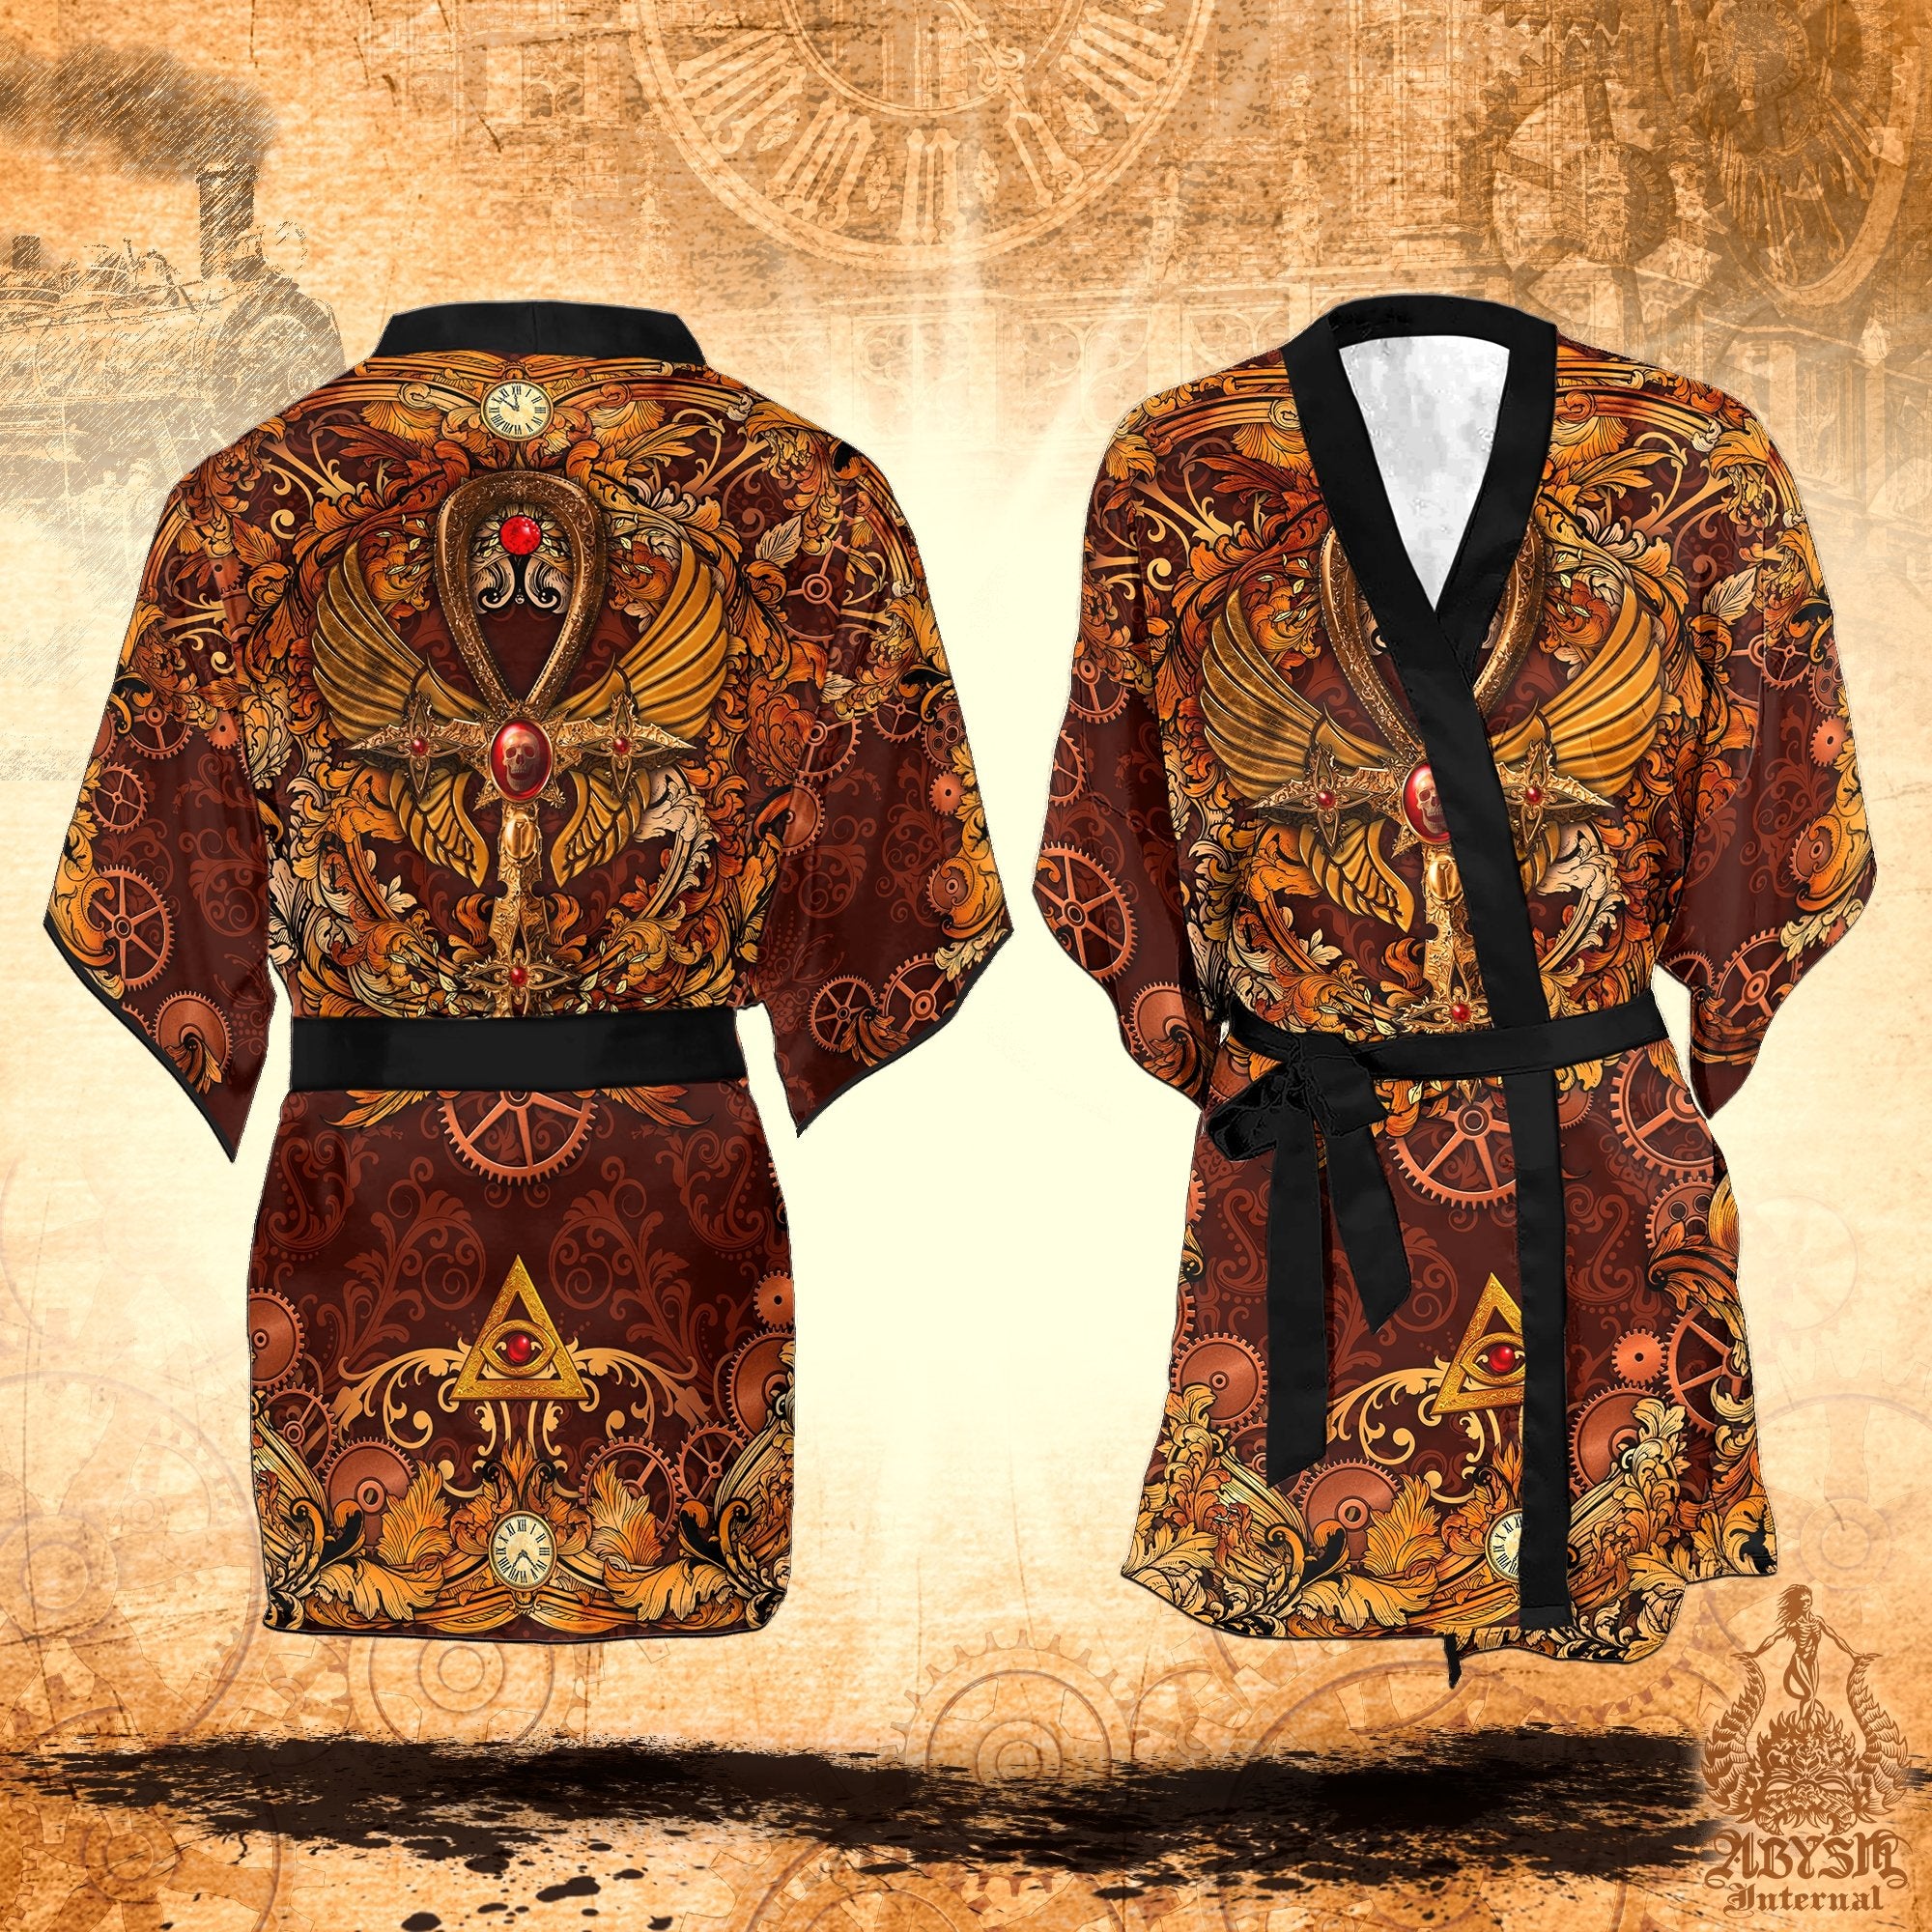 Steampunk Cover Up, Beach Outfit, Party Kimono, Occult Summer Festival Robe, Indie and Alternative Clothing, Unisex - Ankh - Abysm Internal